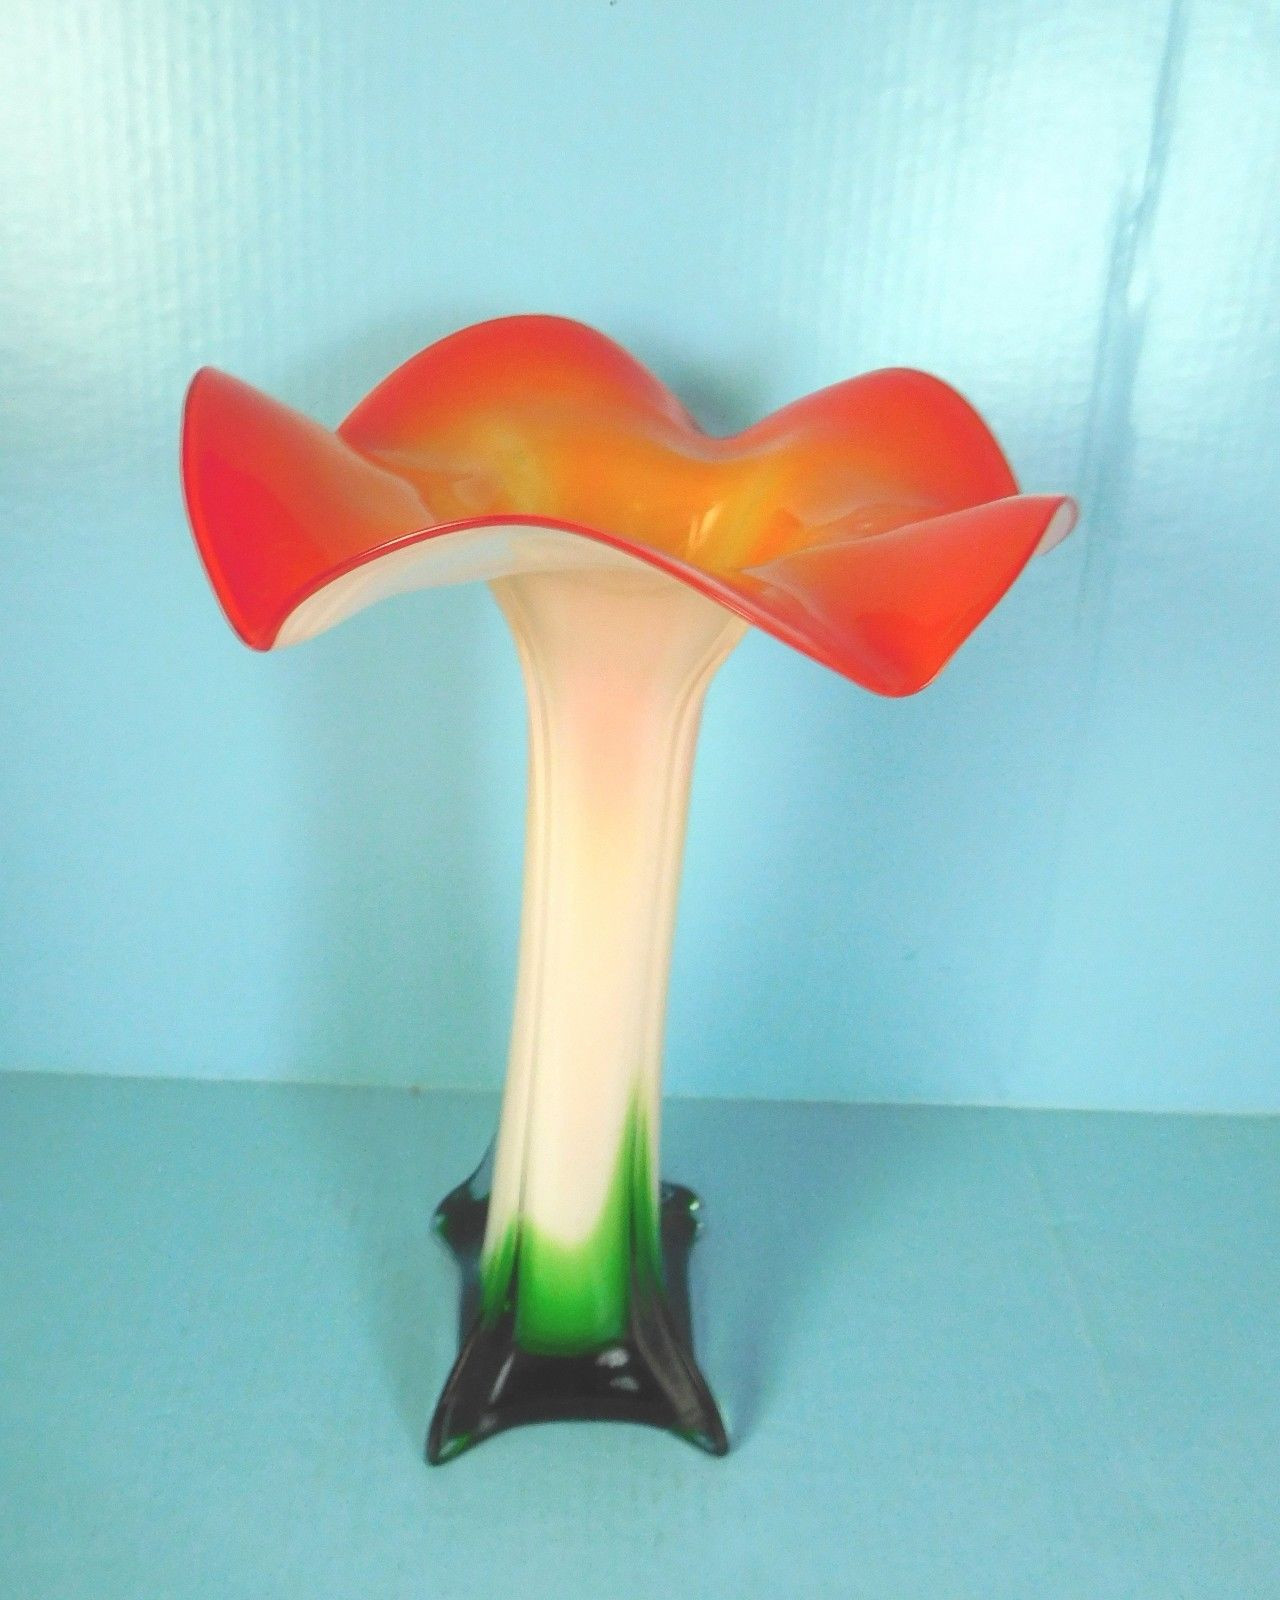 hand blown glass vases vintage of flower petal retro art glass vase 14 25 tall poppy red green throughout flower petal retro art glass vase 14 25 tall poppy red green 1 of 8 see more